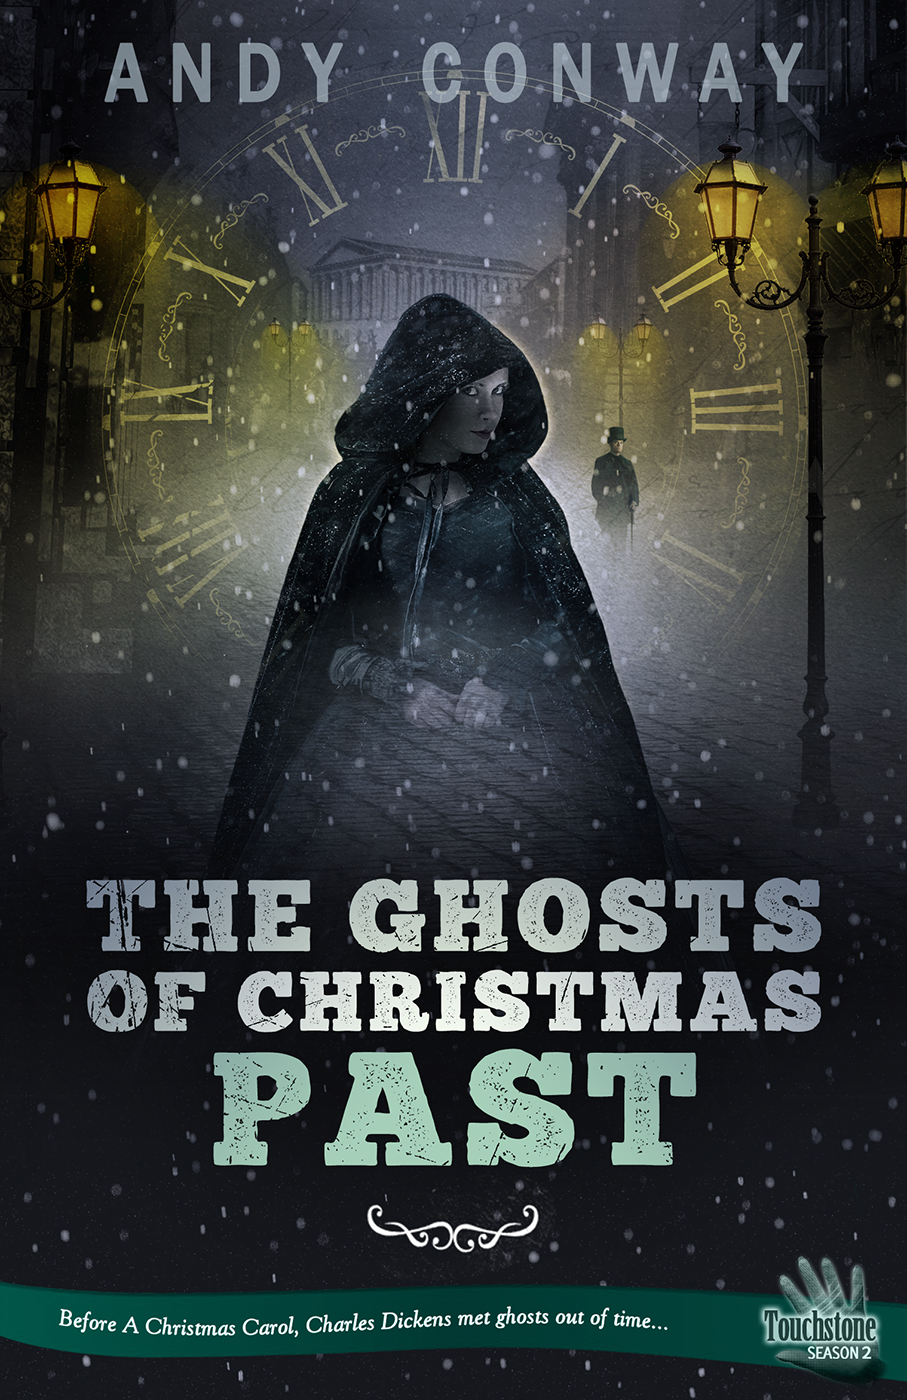 The Ghosts of Christmas Past